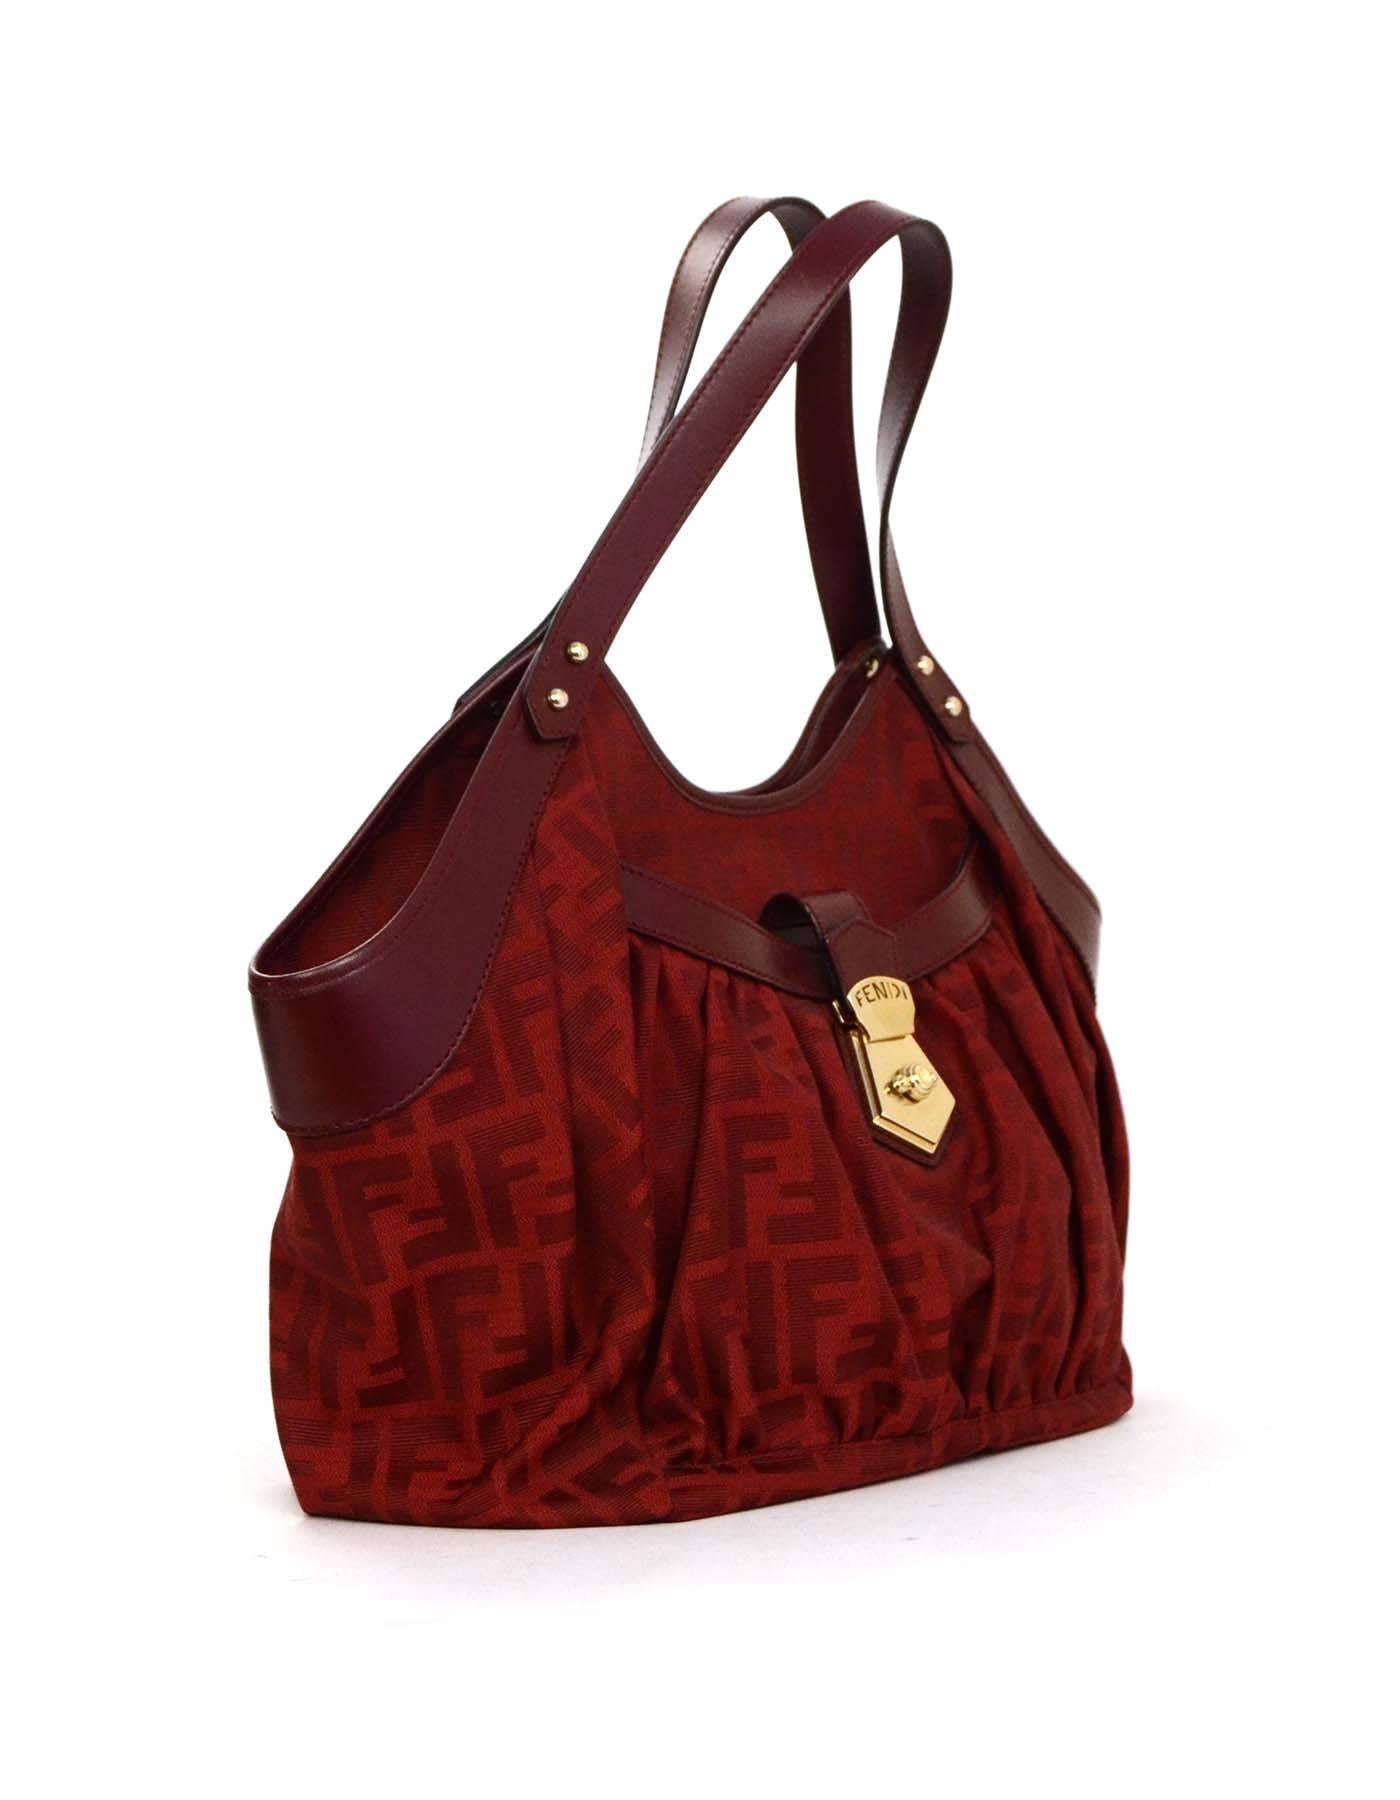 Fendi Red Leather & Zucca Print Canvas Bag 
Features leather strap with goldtone Fendi logo on front pocket
Made In: Italy
Year of Production: 2011
Color: Red
Hardware: Pale goldtone
Materials: Leather and canvas
Lining: Grey